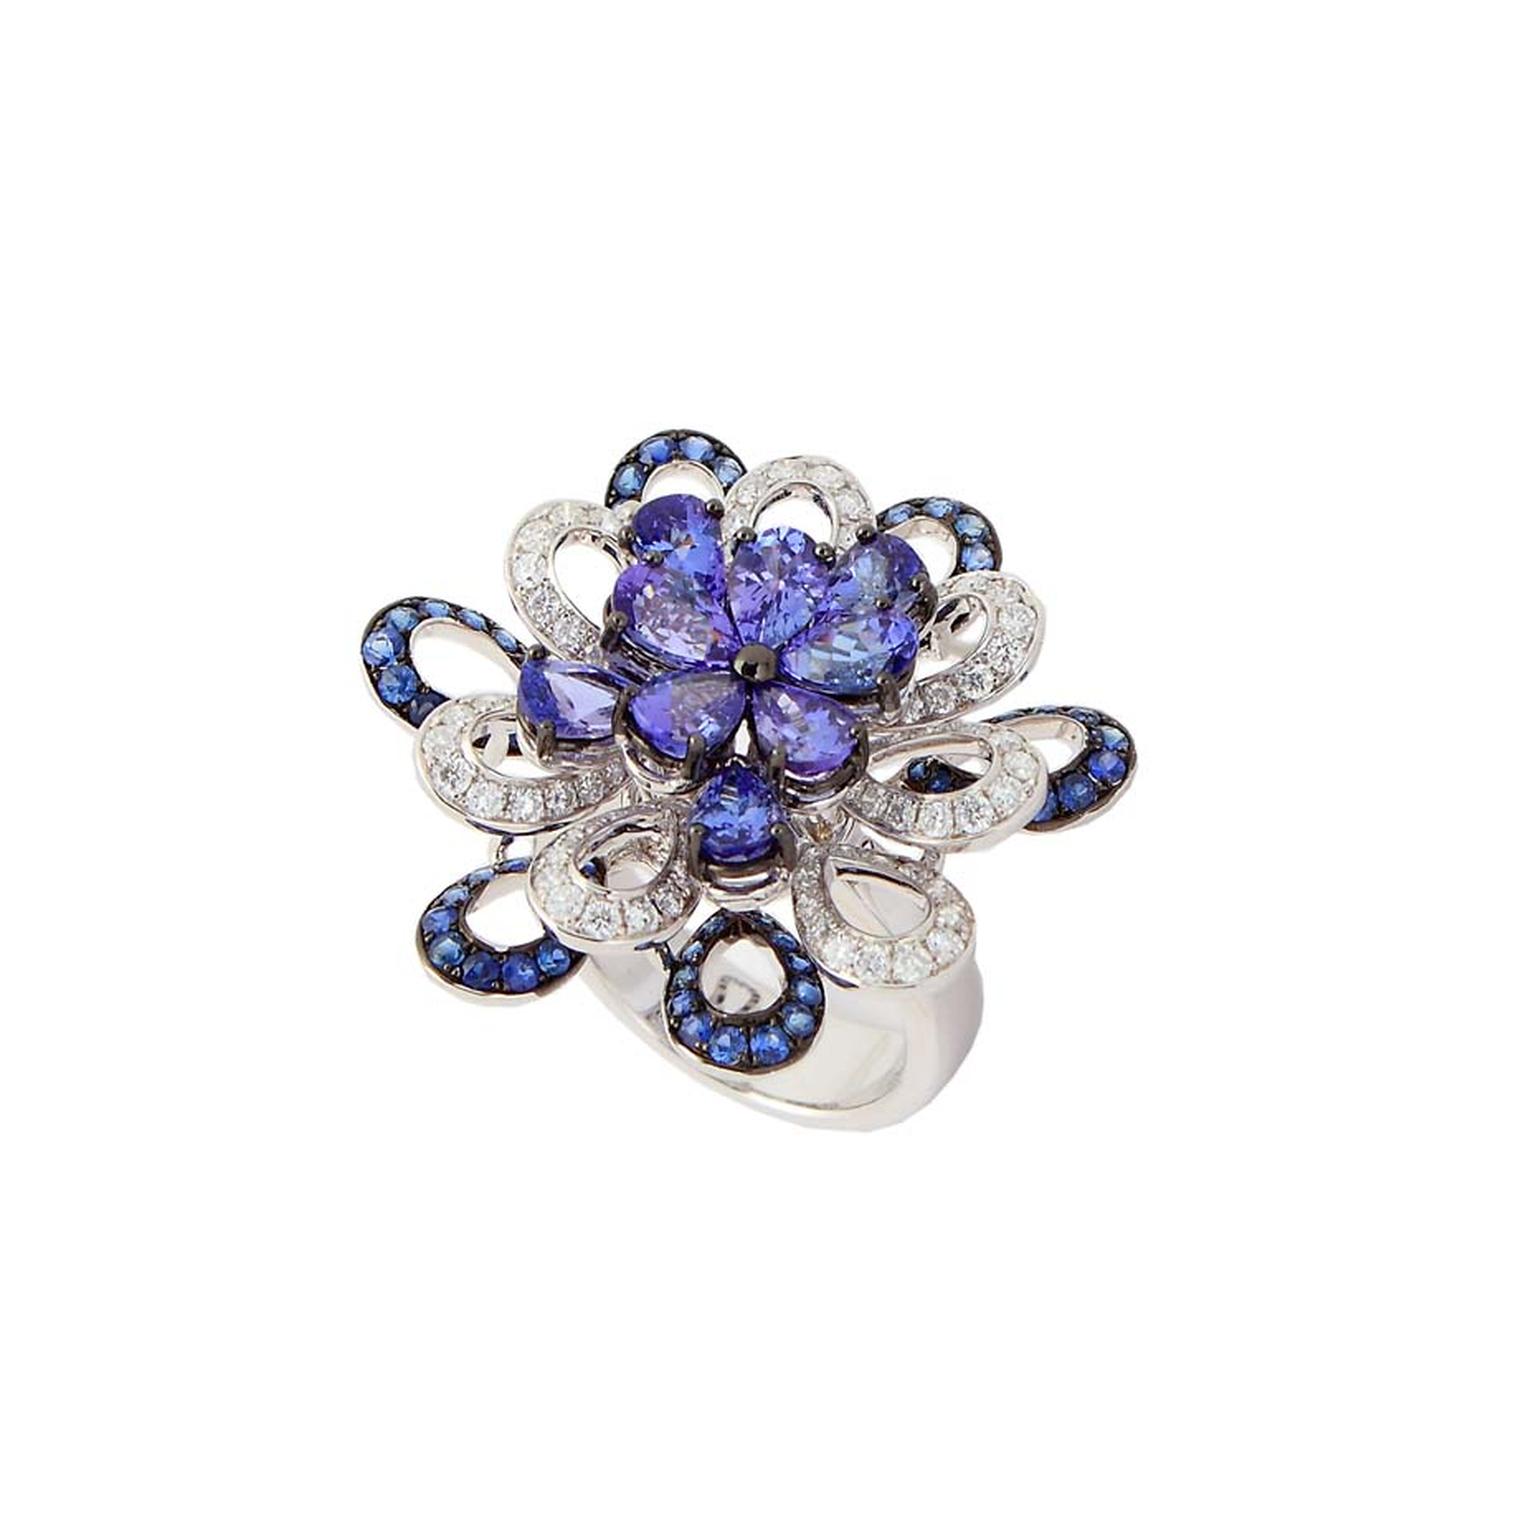 Anmol Jewellers Floral ring with pear-shaped tanzanites and pavé-set diamonds.